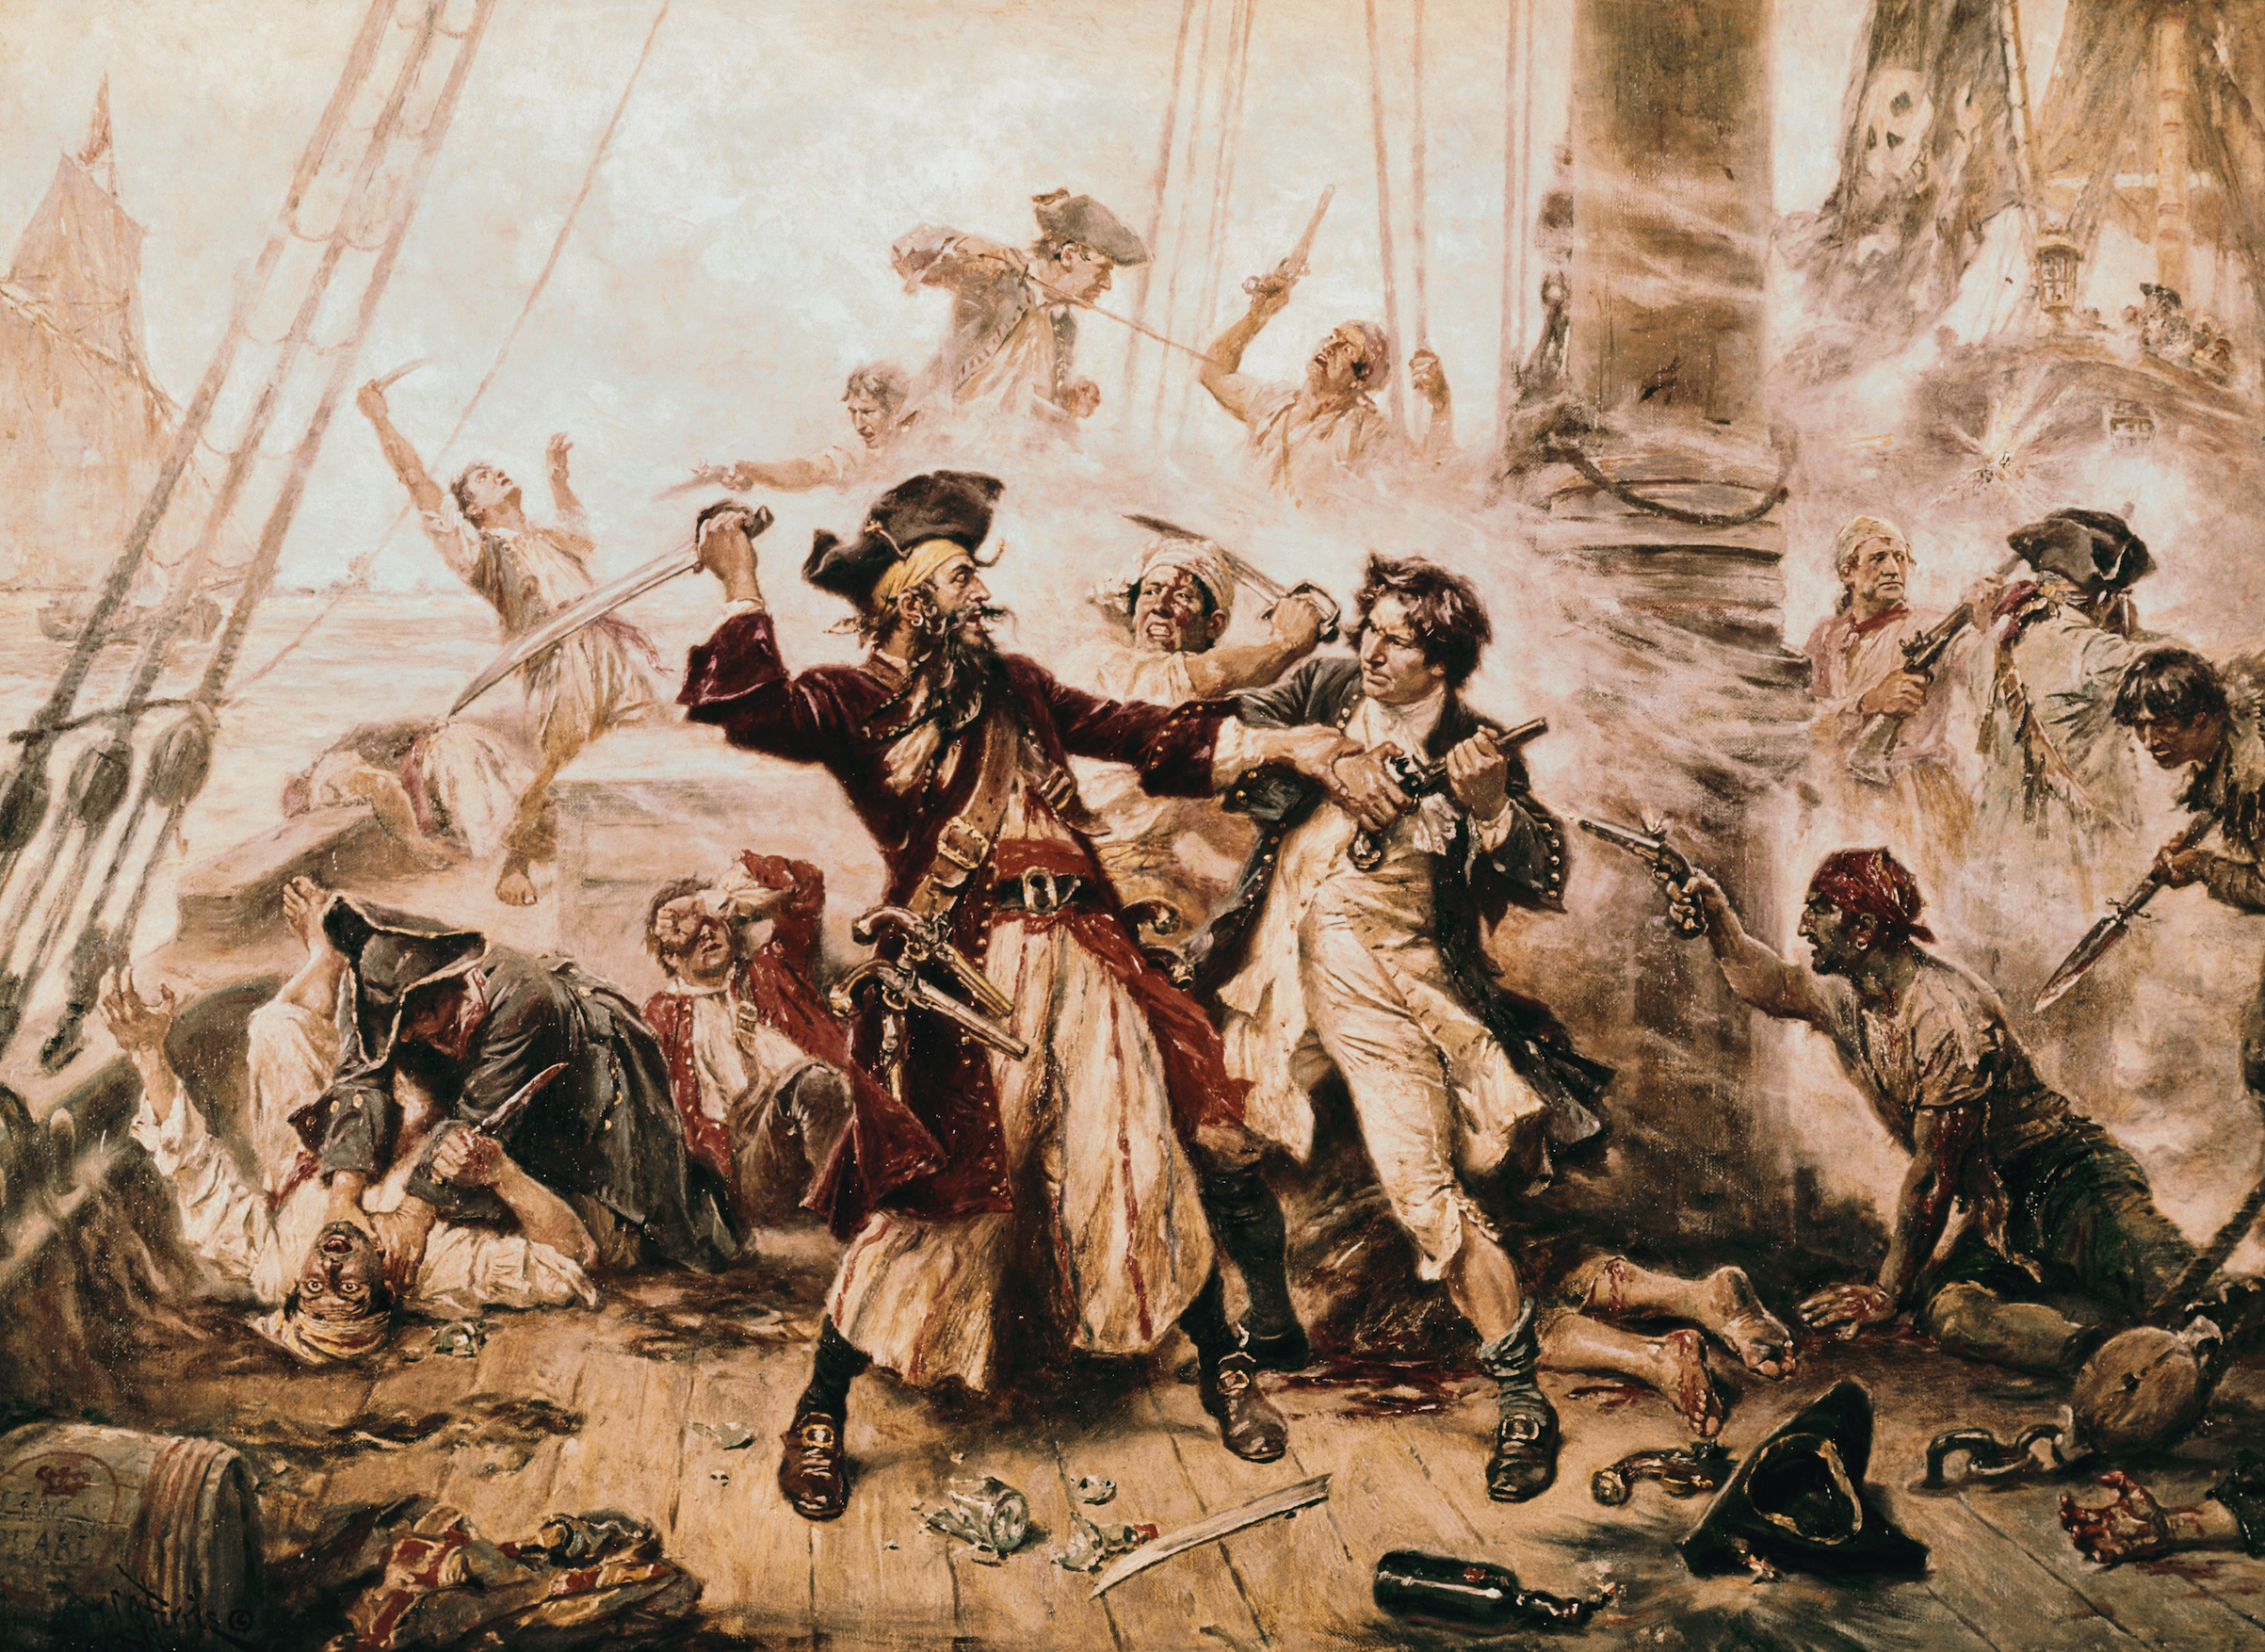 The capture of the Pirate Blackbeard, 1718. Painting by J. L. G. Ferris. (Bettmann/Getty Images)